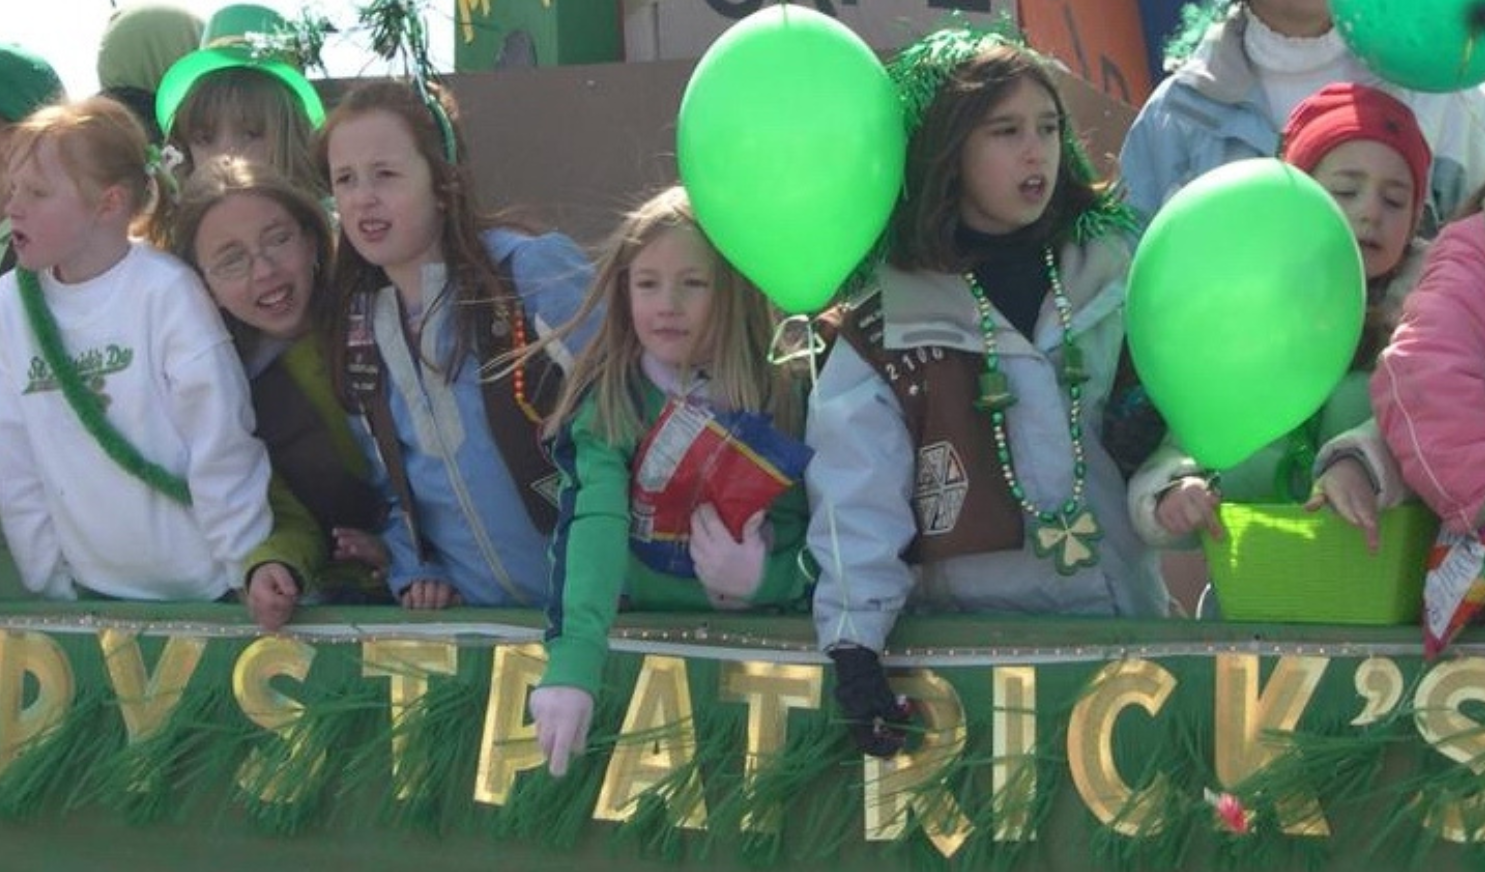 Safety tips from Nags Head police ahead of Kelly’s St. Patrick’s Day Parade on Sunday